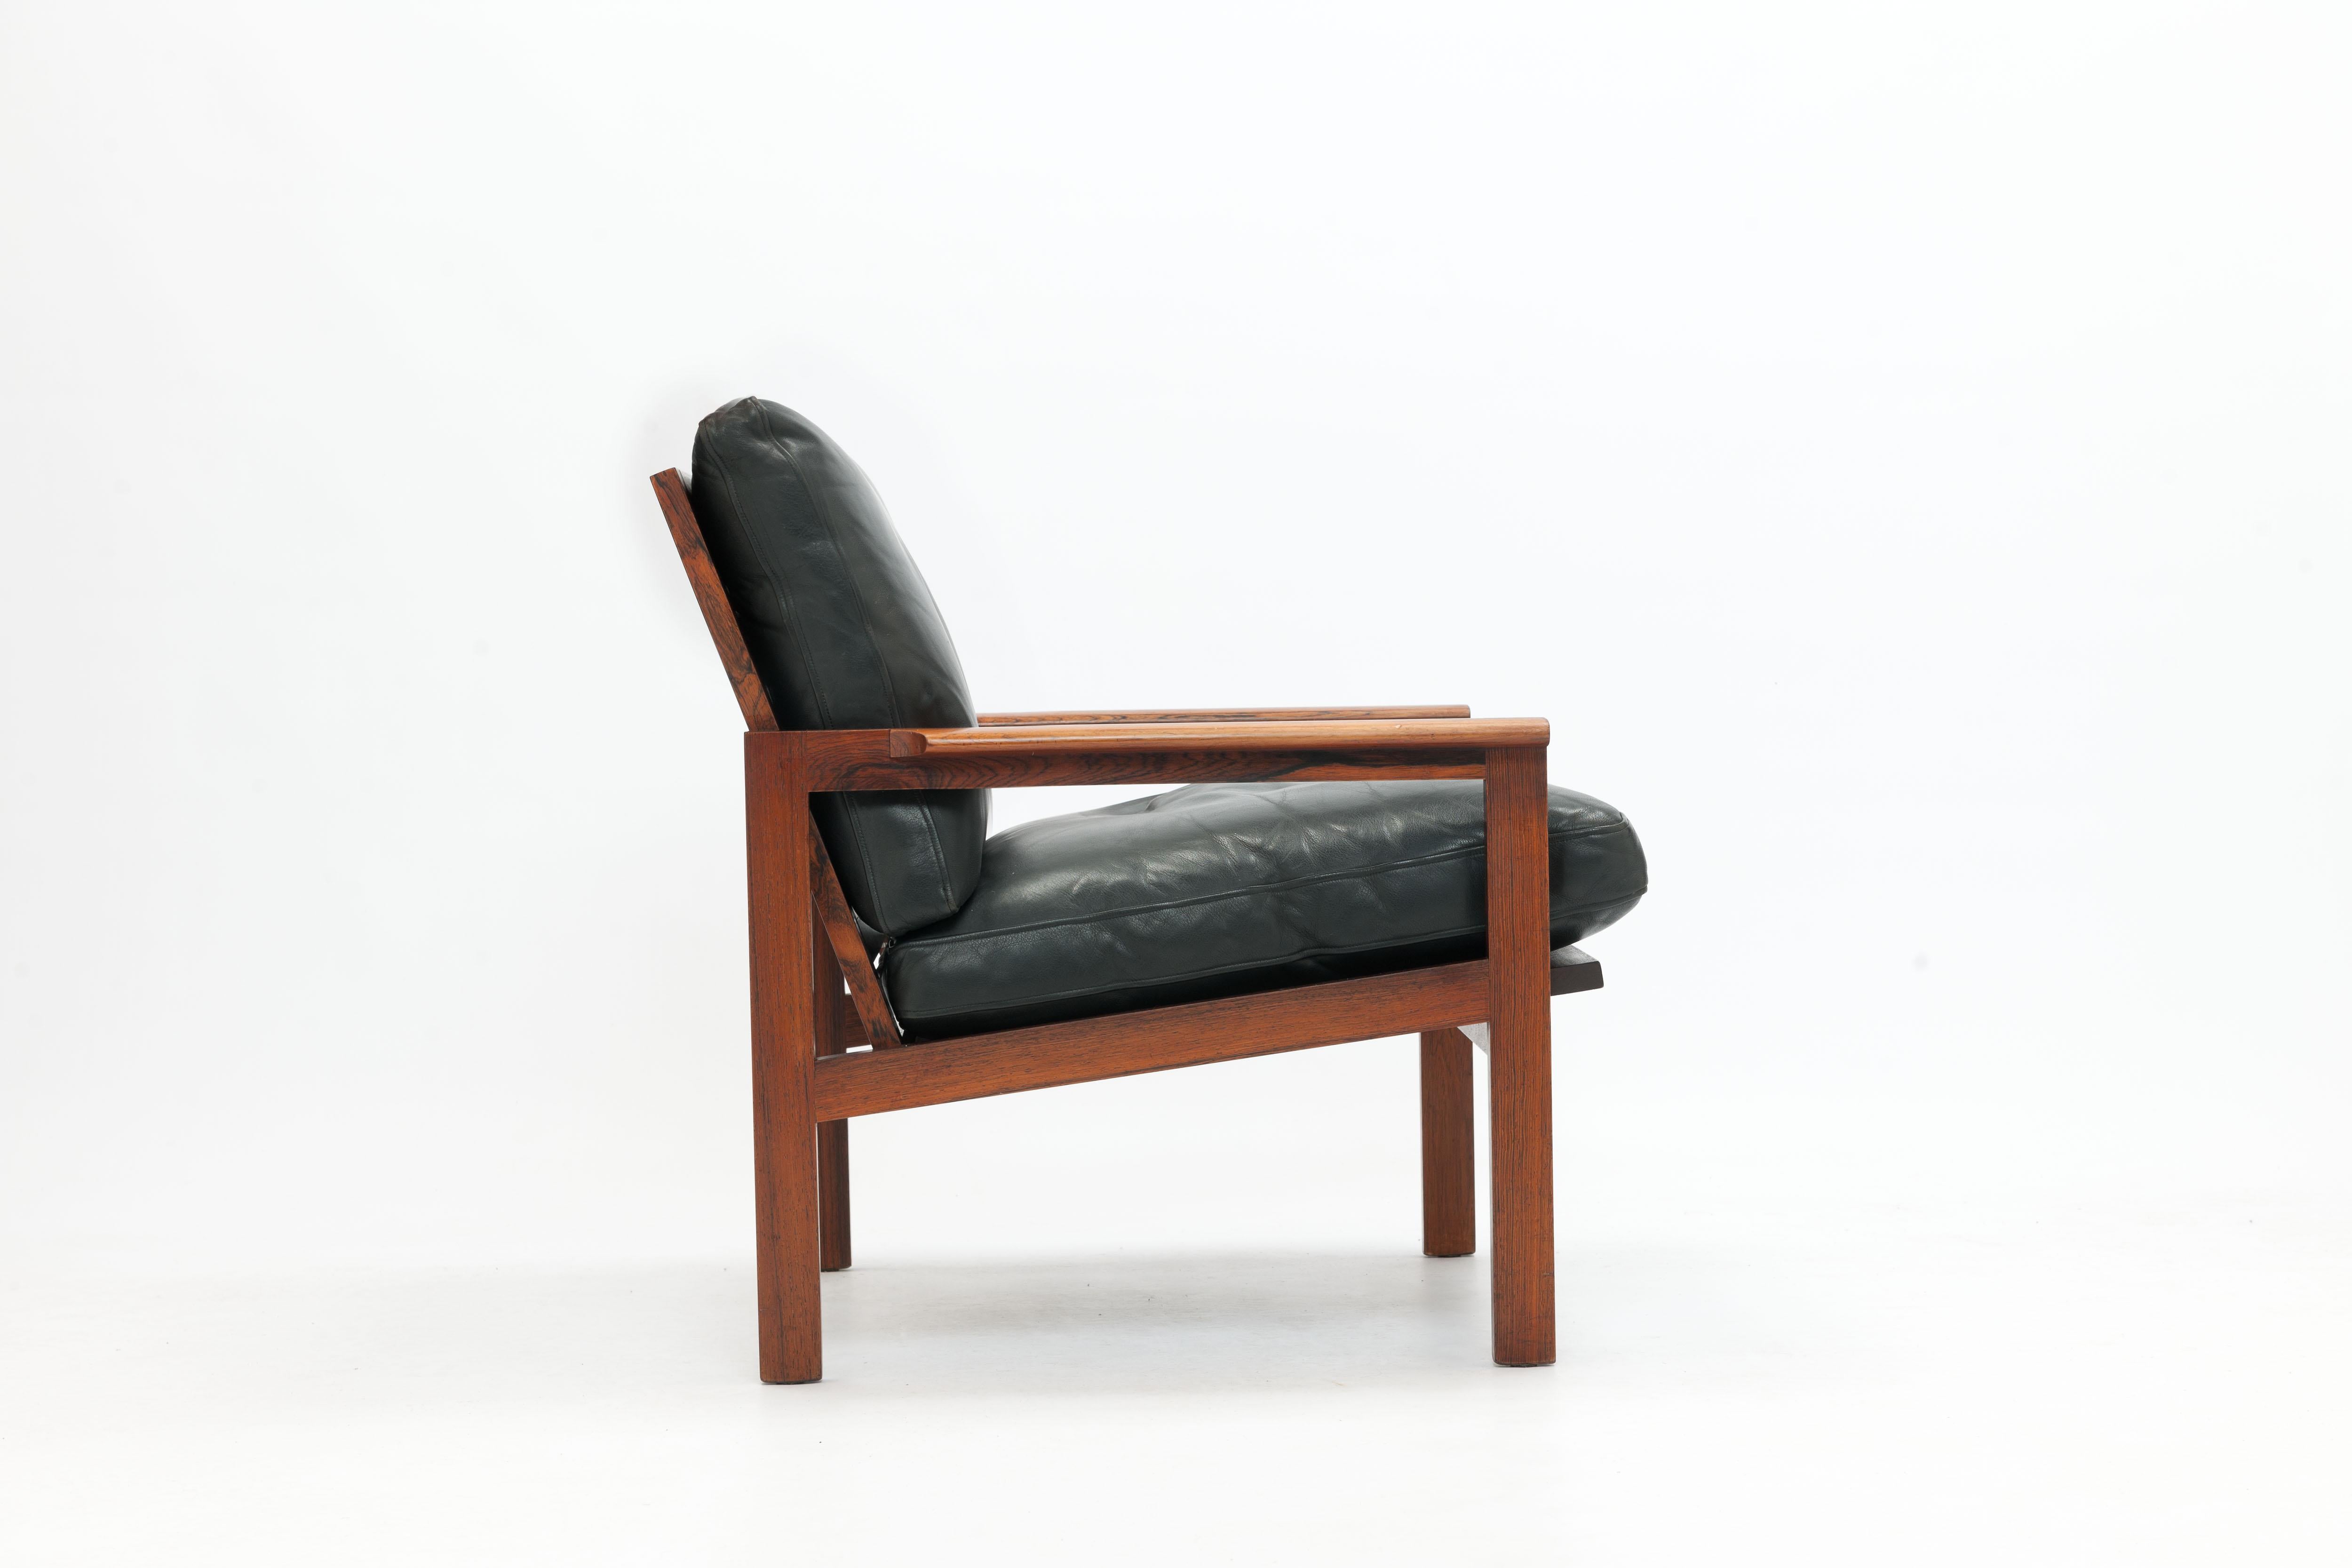 Arm chair model 4 from the Capella Series designed in 1958 by Illum Wikkelsø executed in beautiful Rosewood with black leather loose cushions. 
Made by Danish manufacturer Niels Eilersen marked to underside of seat.

Wikkelsø's background in